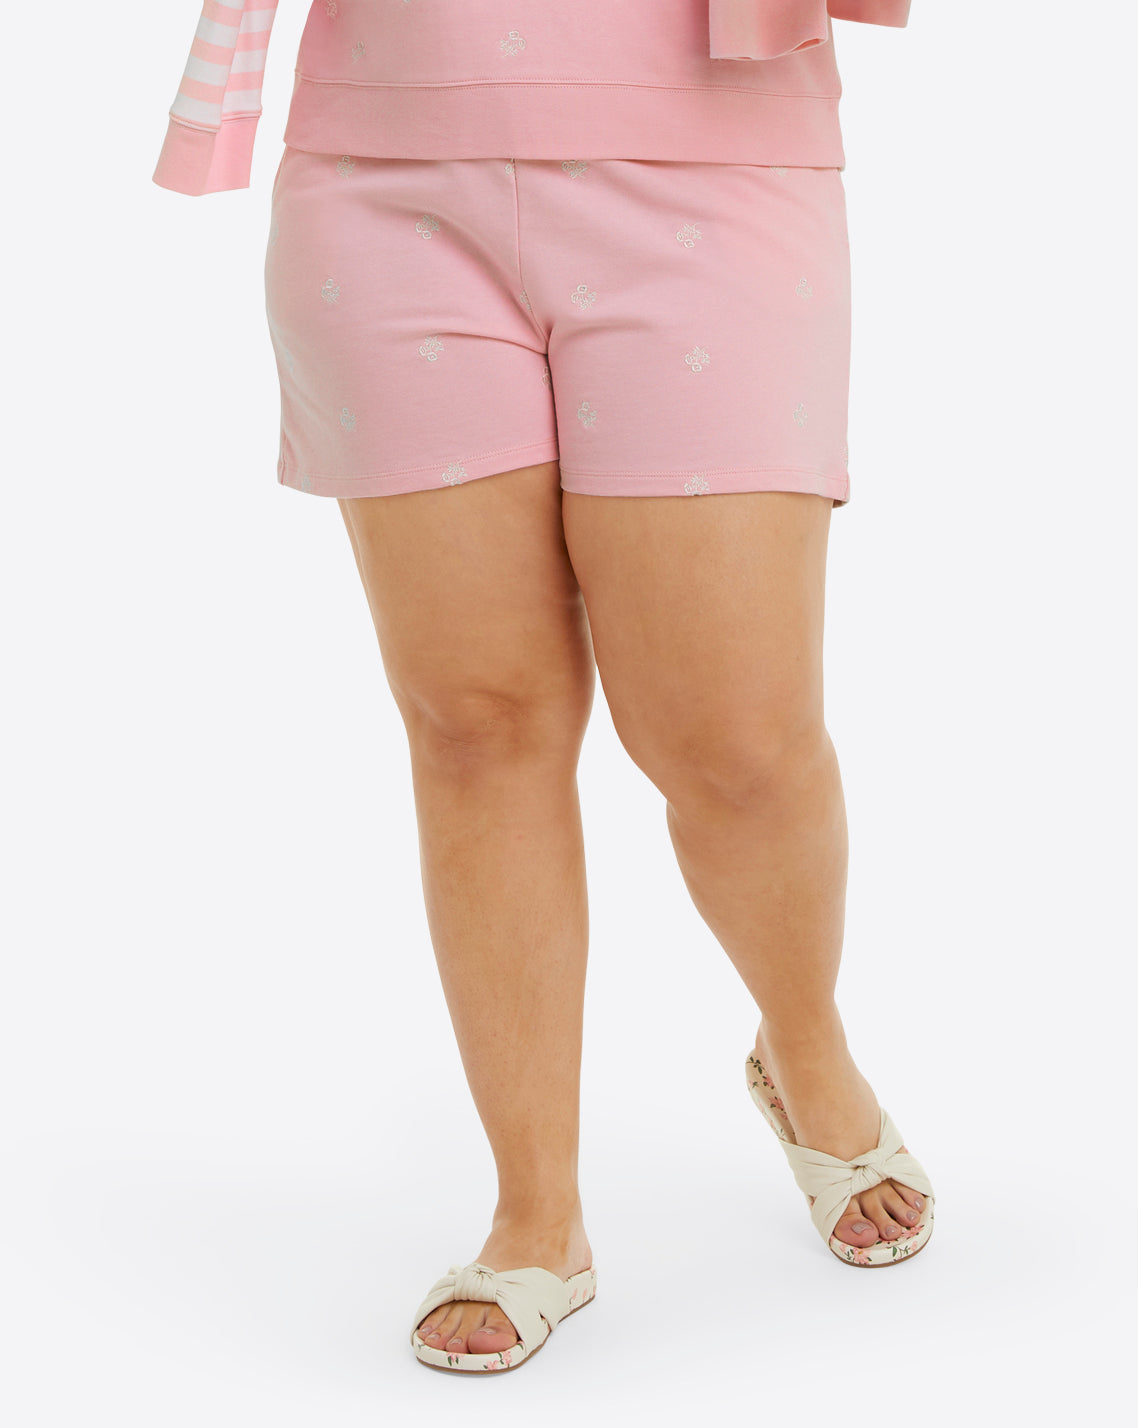 Bobbie Sweat Shorts in Pink Embroidered Viola